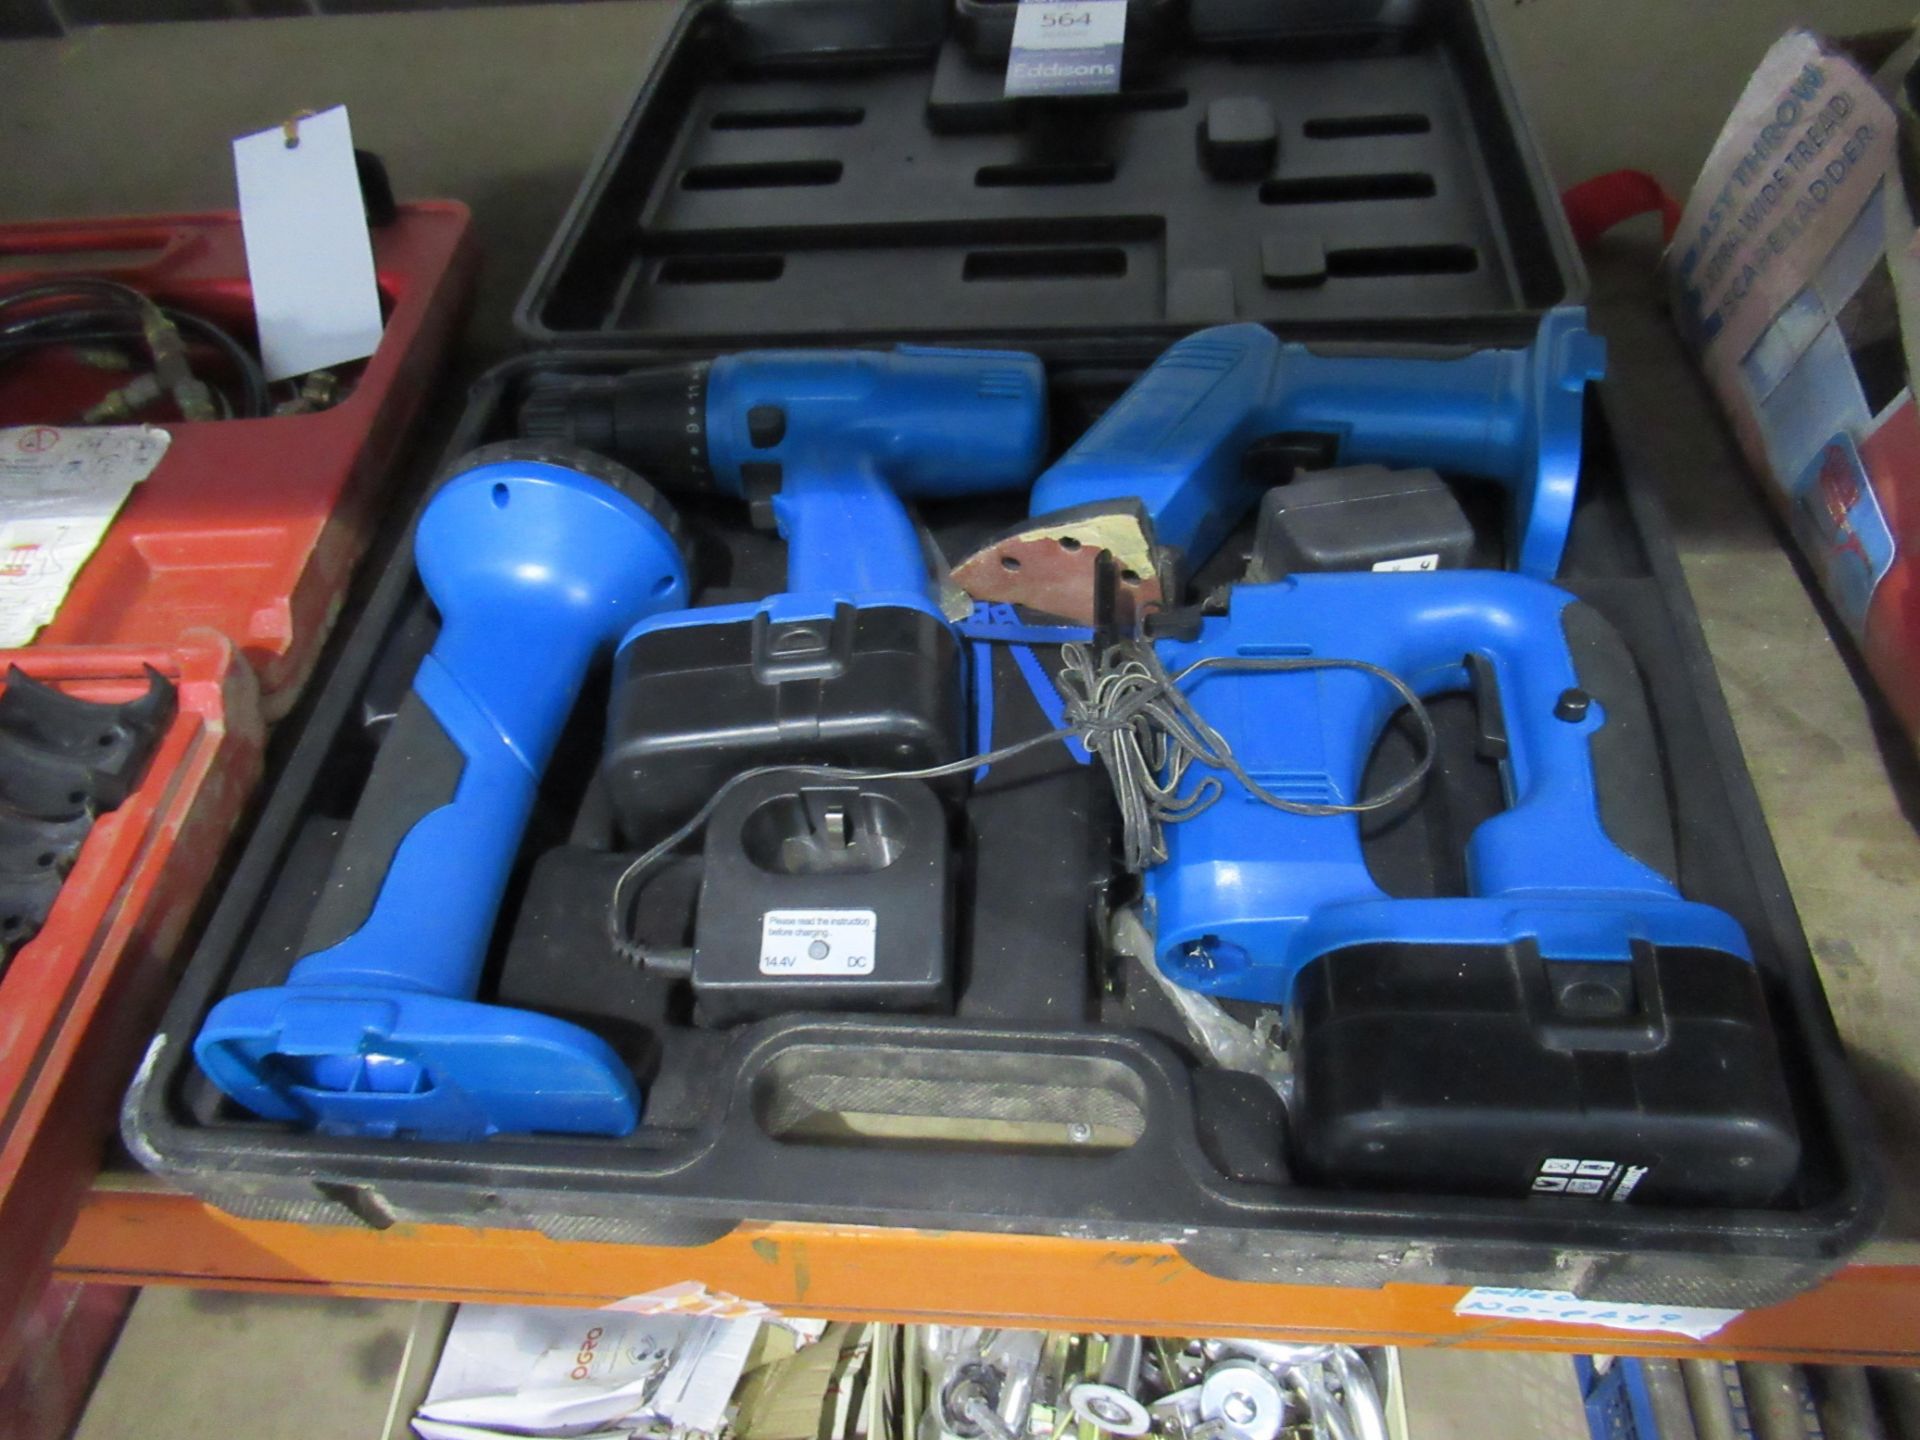 A Silverline Battery Powered Tool Set "untested"